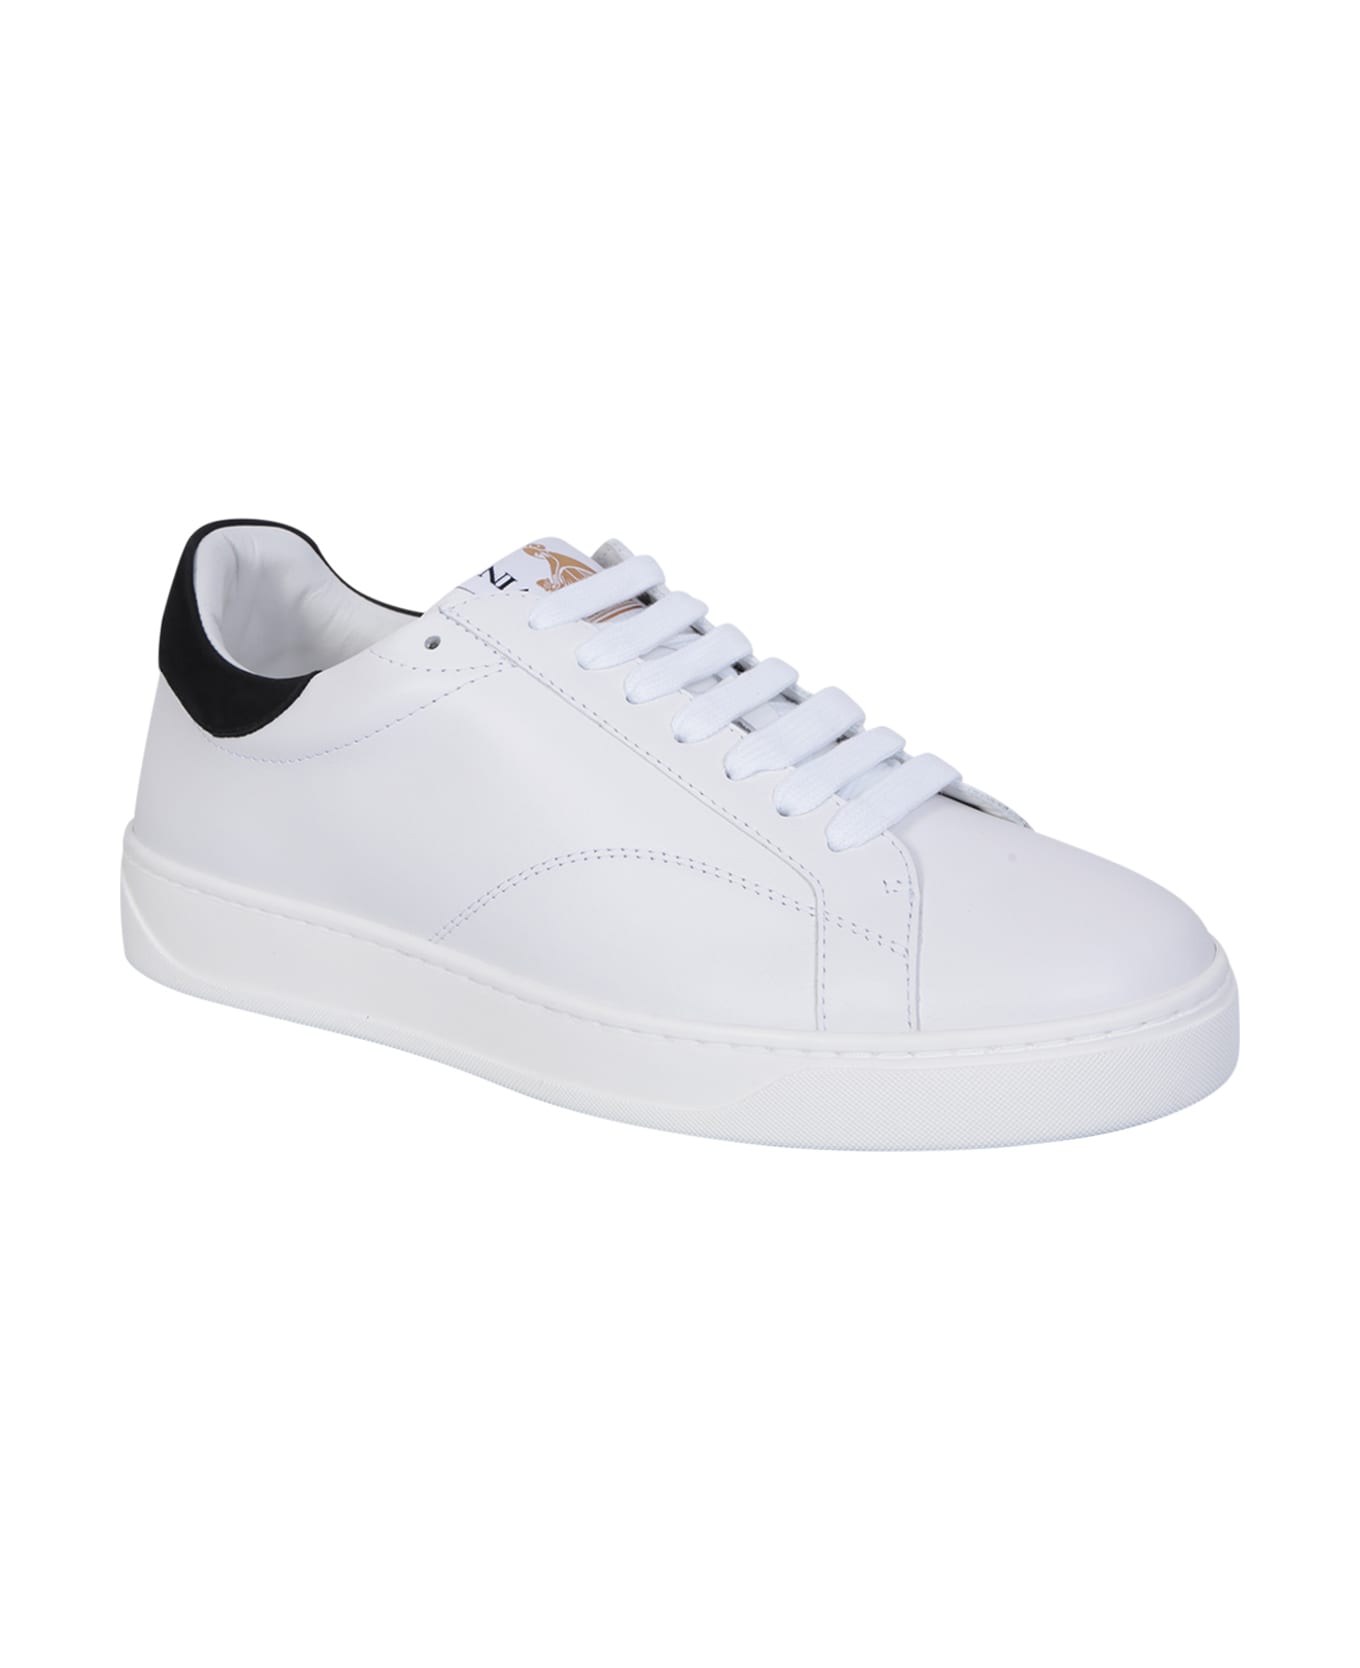 Lanvin White And Black Ddb0 Sneakers - Bianco スニーカー